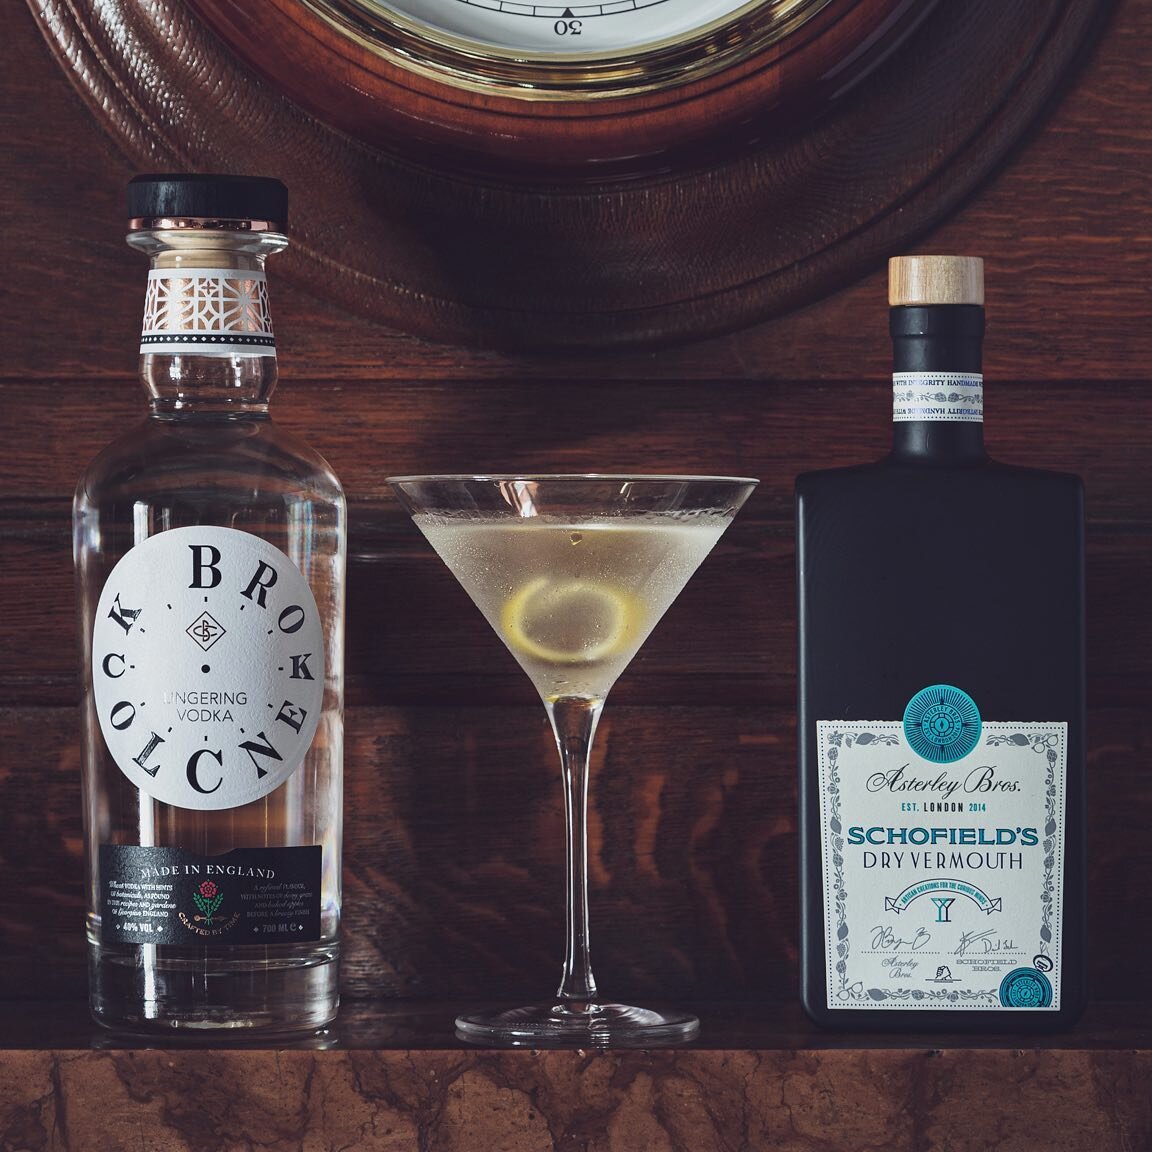 MARTINI TIME
-
There&rsquo;s still time to win some delicious @brokenclockvodka and our SCHOFIELD&rsquo;S Dry Vermouth for the ultimate English Vodka Martini. And just in time for the Easter holidays too! Check out the previous post on our grid to wi